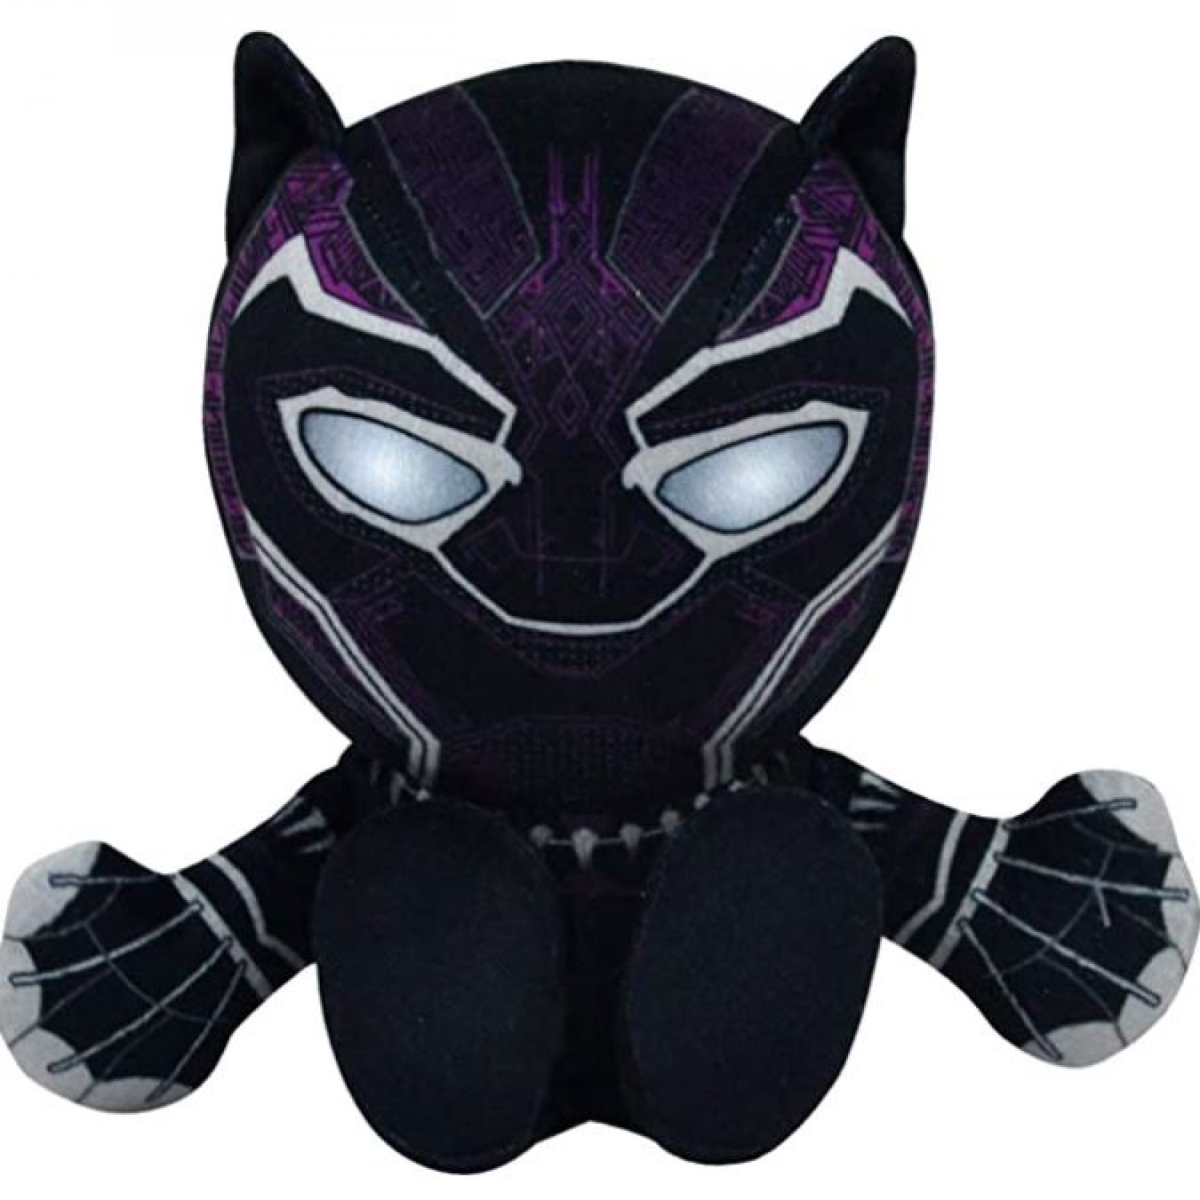 Picture of Black Panther 820300 8 in. Marvel Black Panther Kuricha Sitting Plush Doll